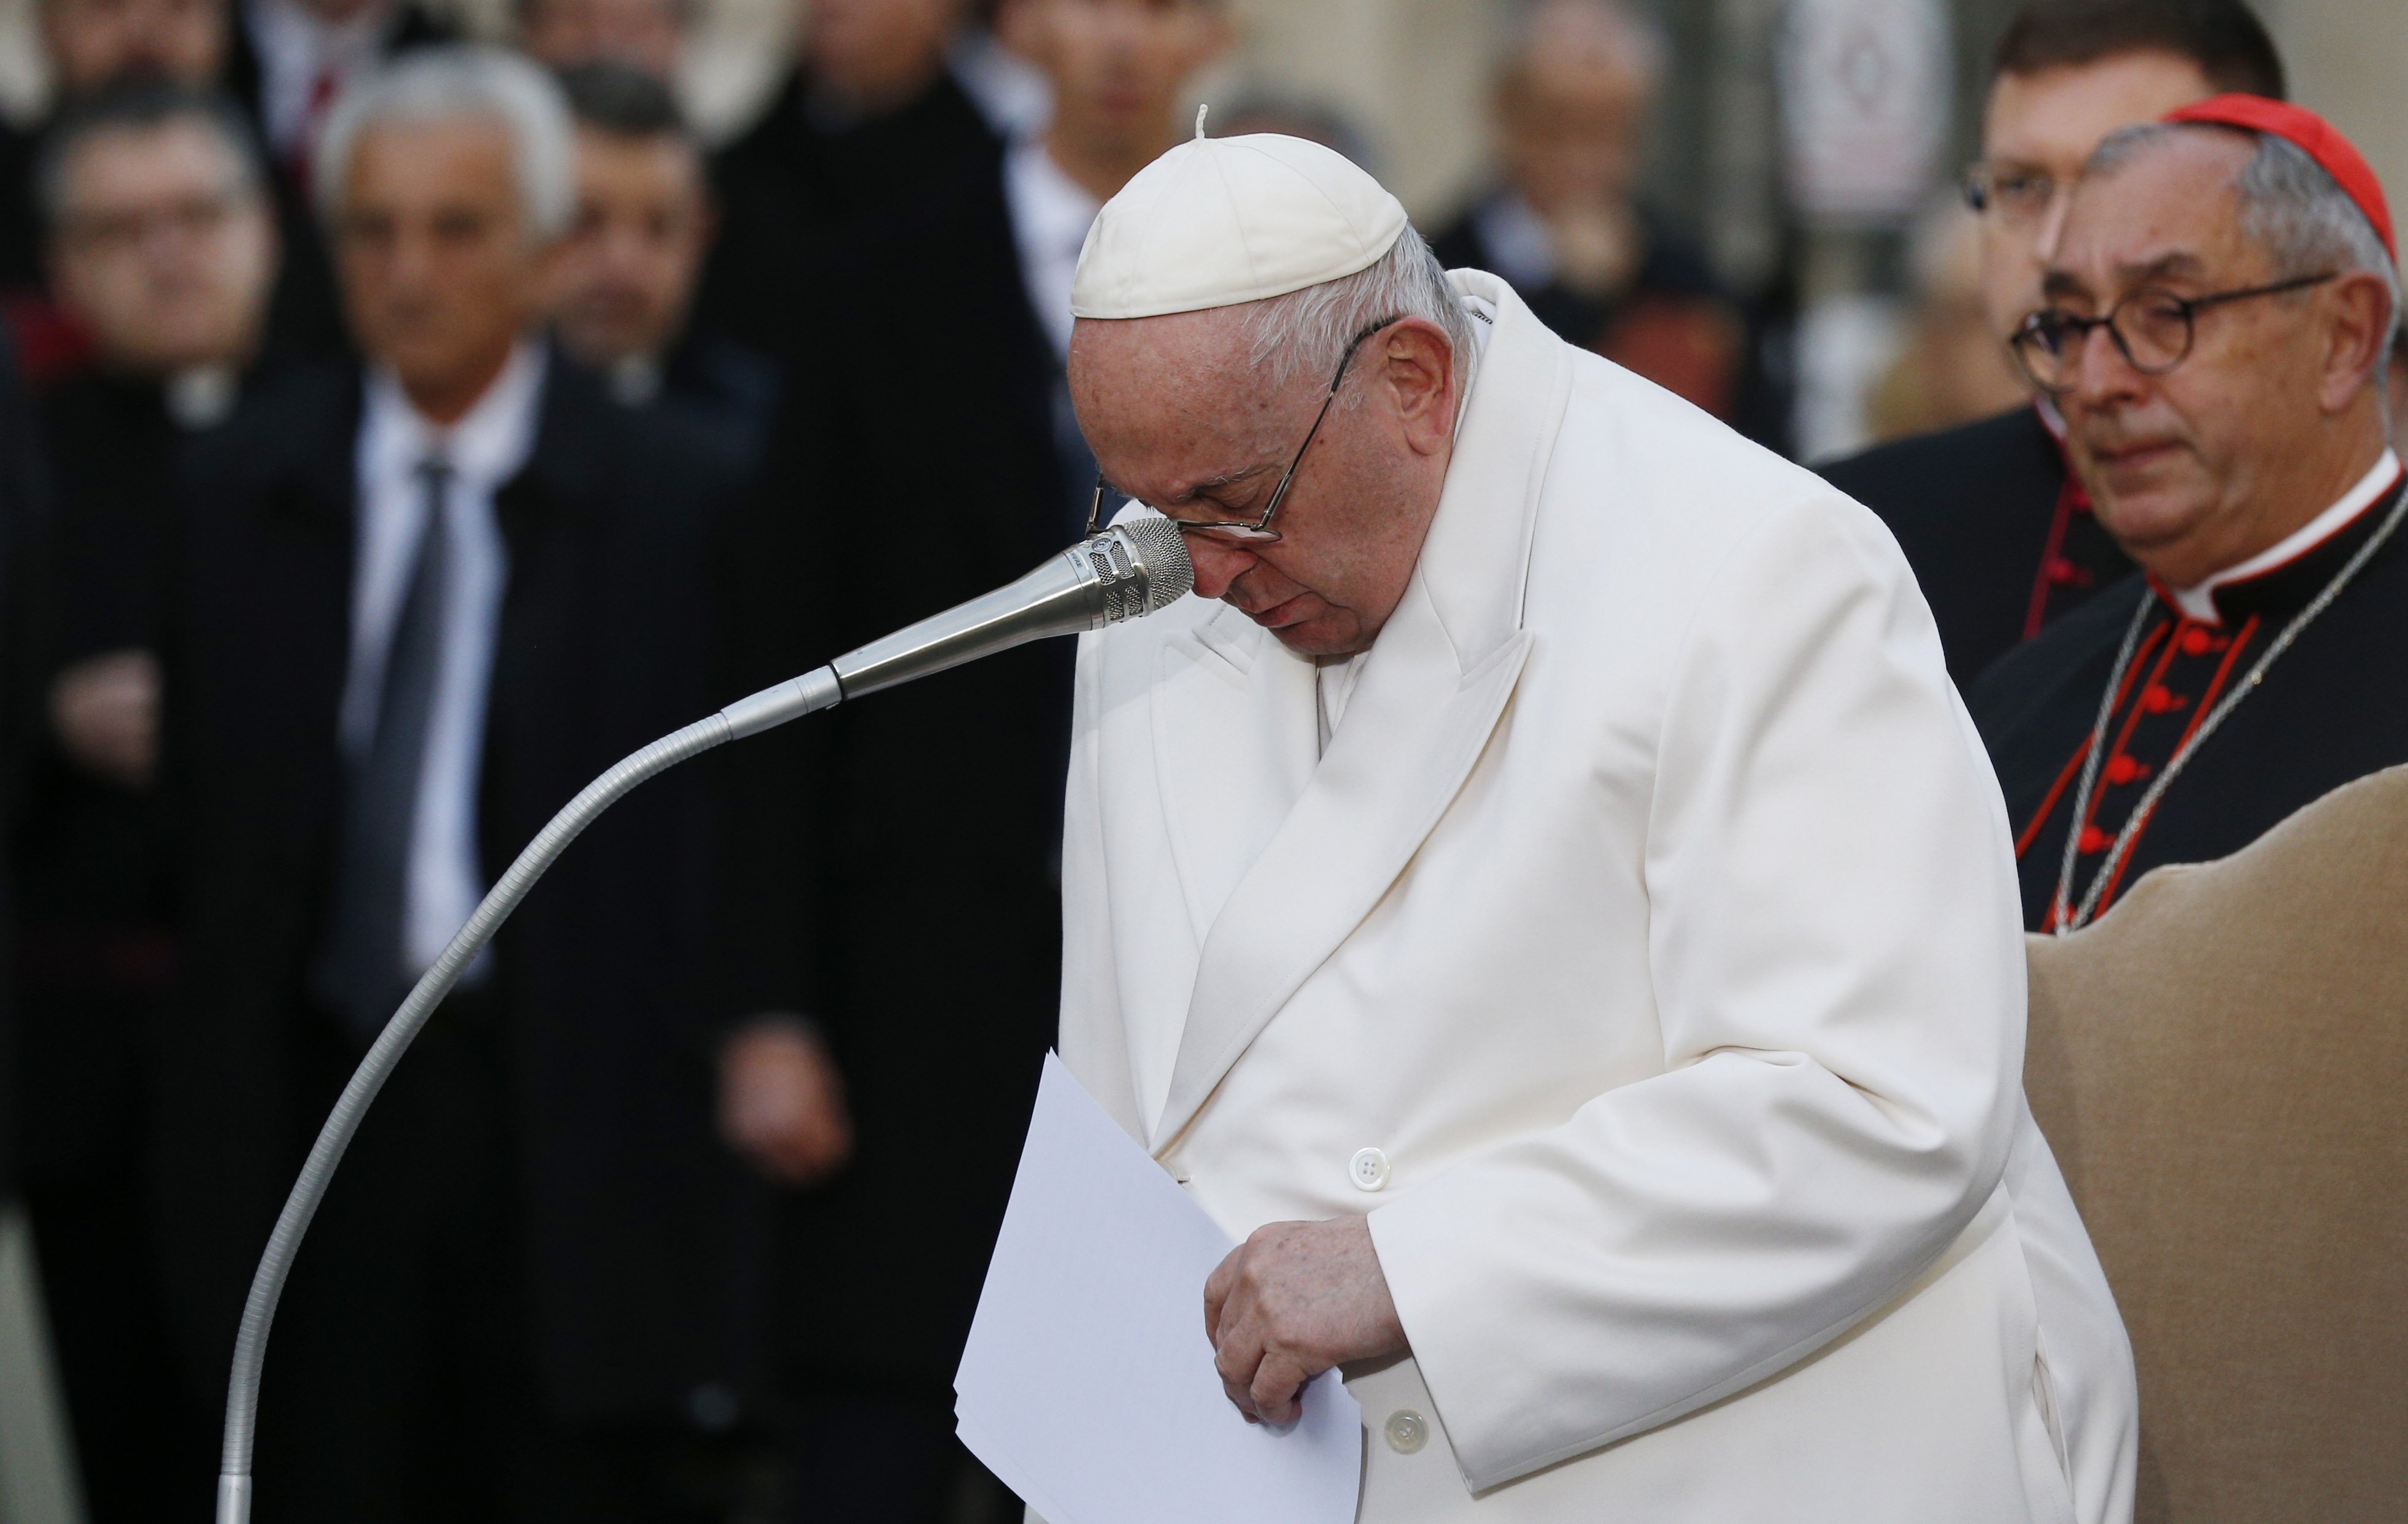 Pope Francis cries as he prays for Ukraine in front of a Marian statue at the Spanish Steps in Rome Dec. 8, 2022, the feast of the Immaculate Conception. (CNS/Paul Haring)